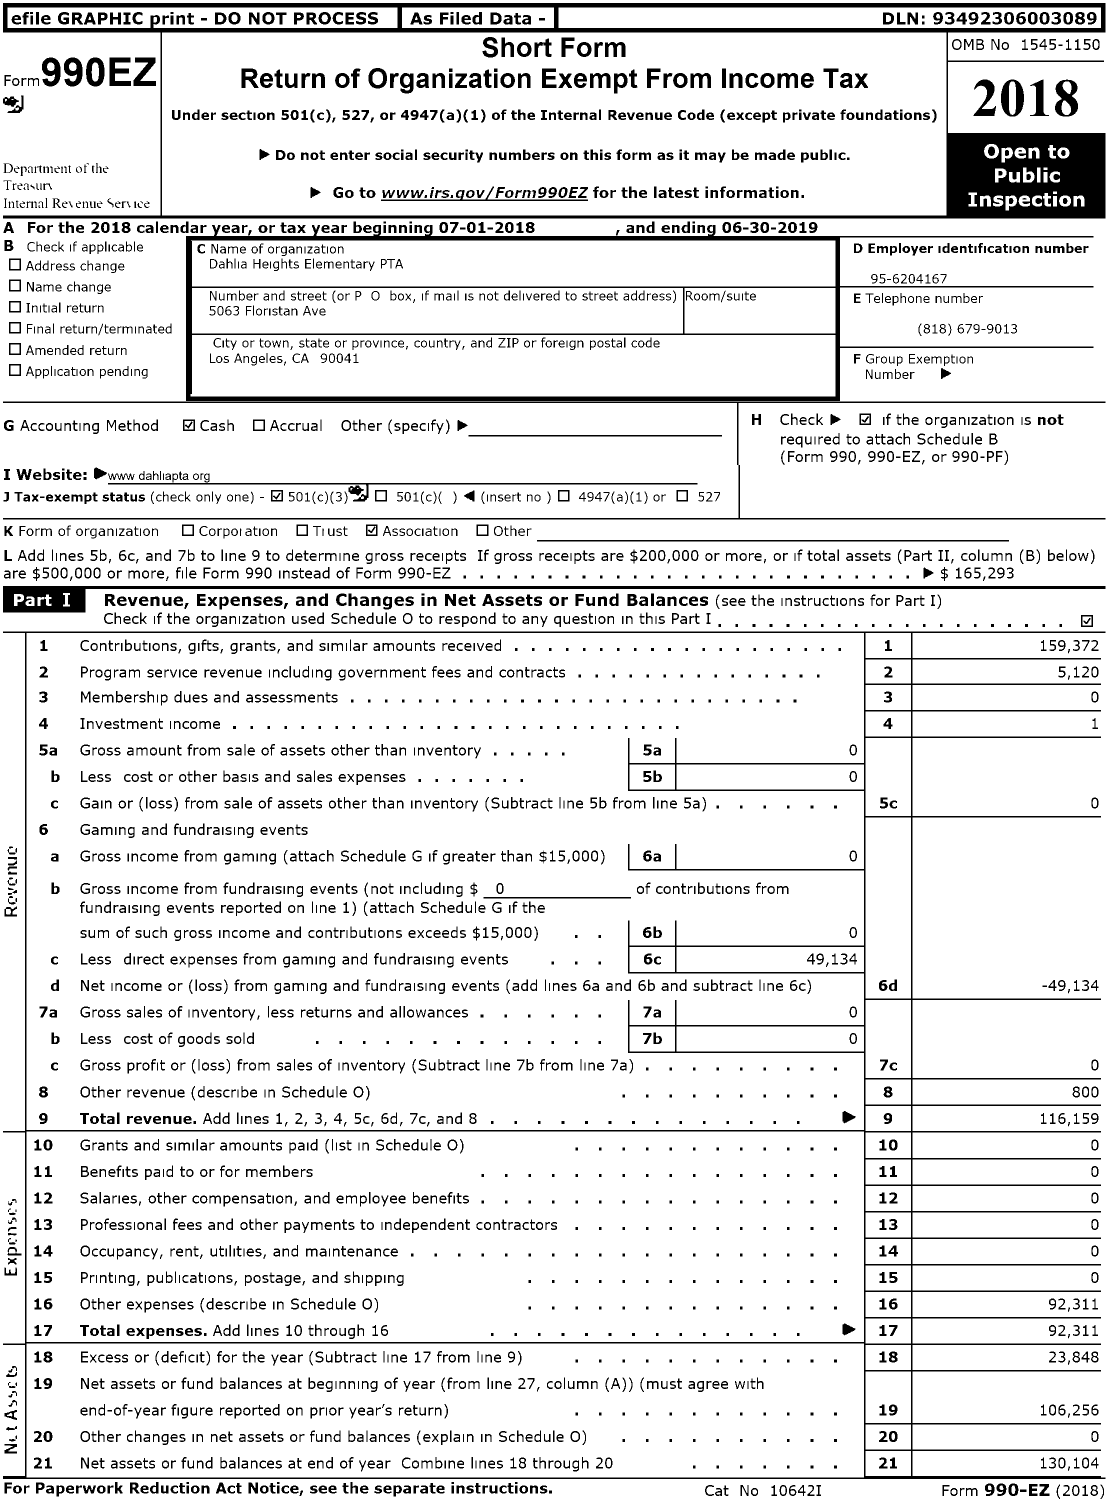 Image of first page of 2018 Form 990EZ for CALIFORNIA State PTA - Dahlia HEIGHTS Elementary PTA